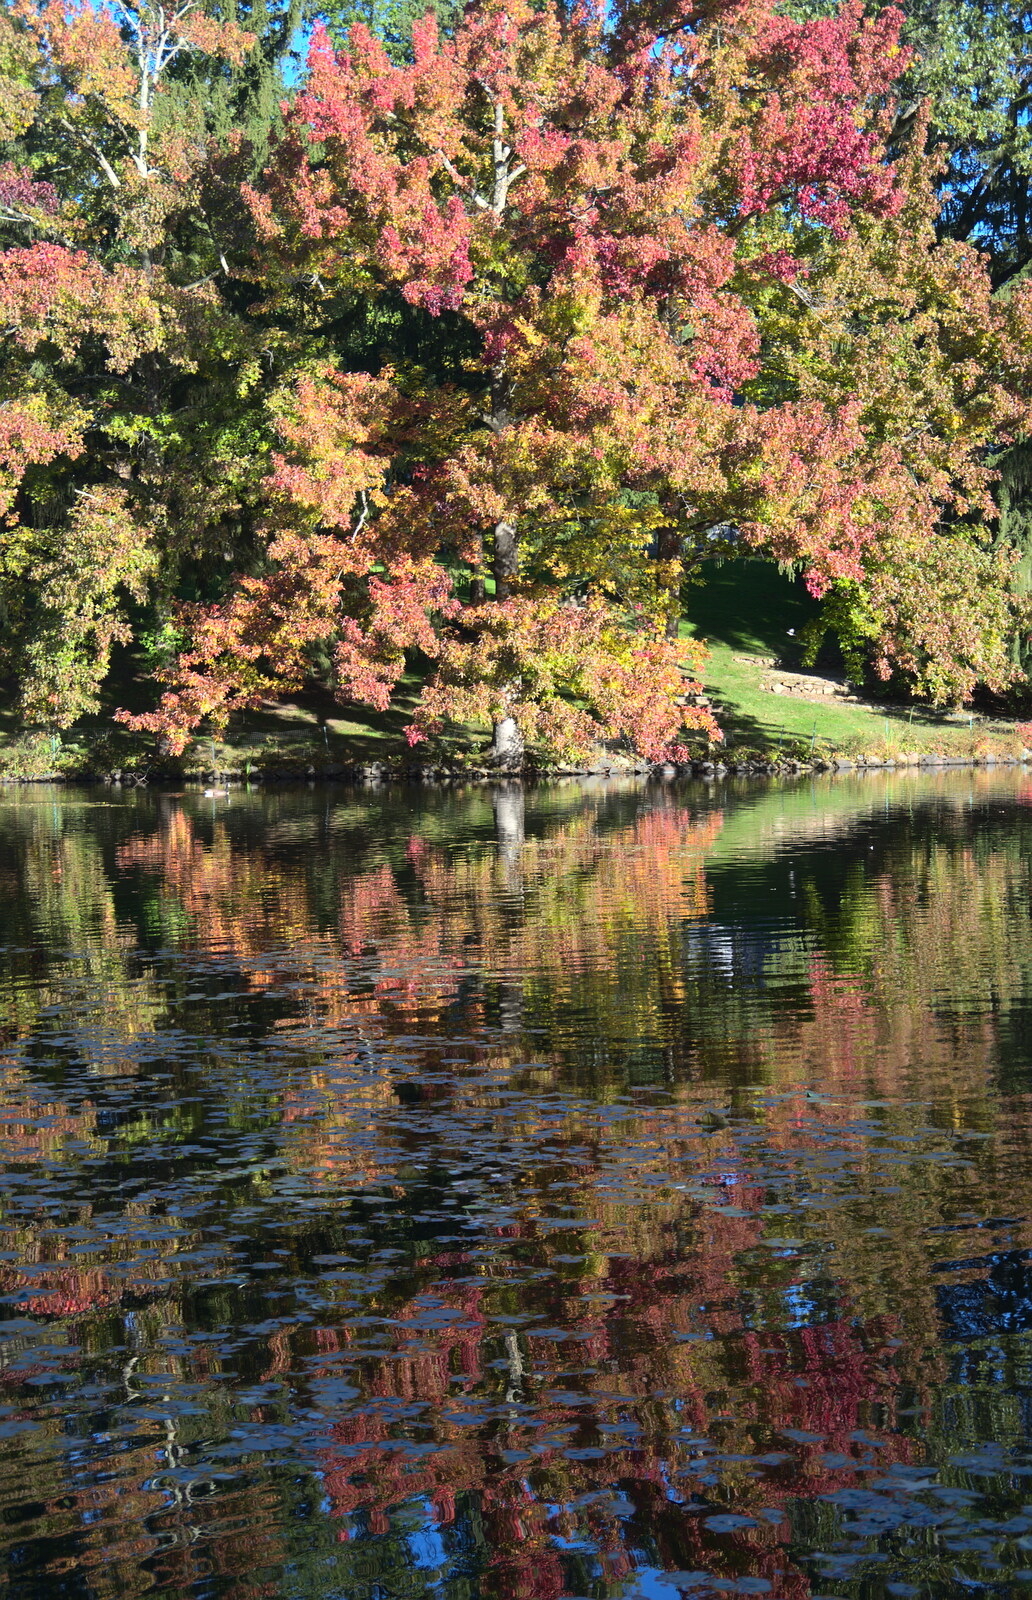 Autumn colours reflected in the pond from Pumpkin Picking at Alstede Farm, Chester, Morris County, New Jersey - 24th October 2018